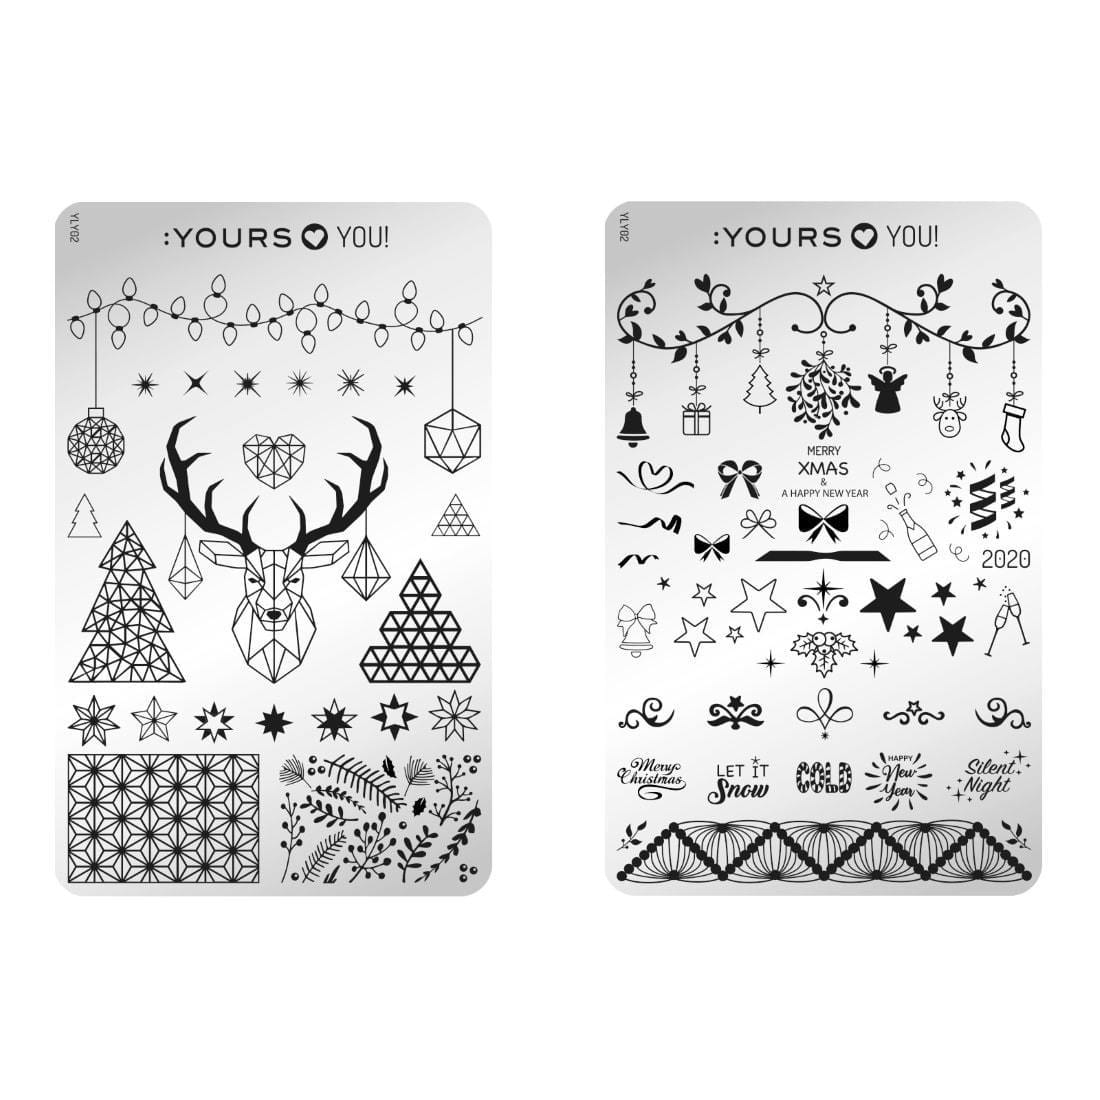 YOURS Loves YOU – Under the Mistletoe (Double Sided) - Fanair Cosmetiques